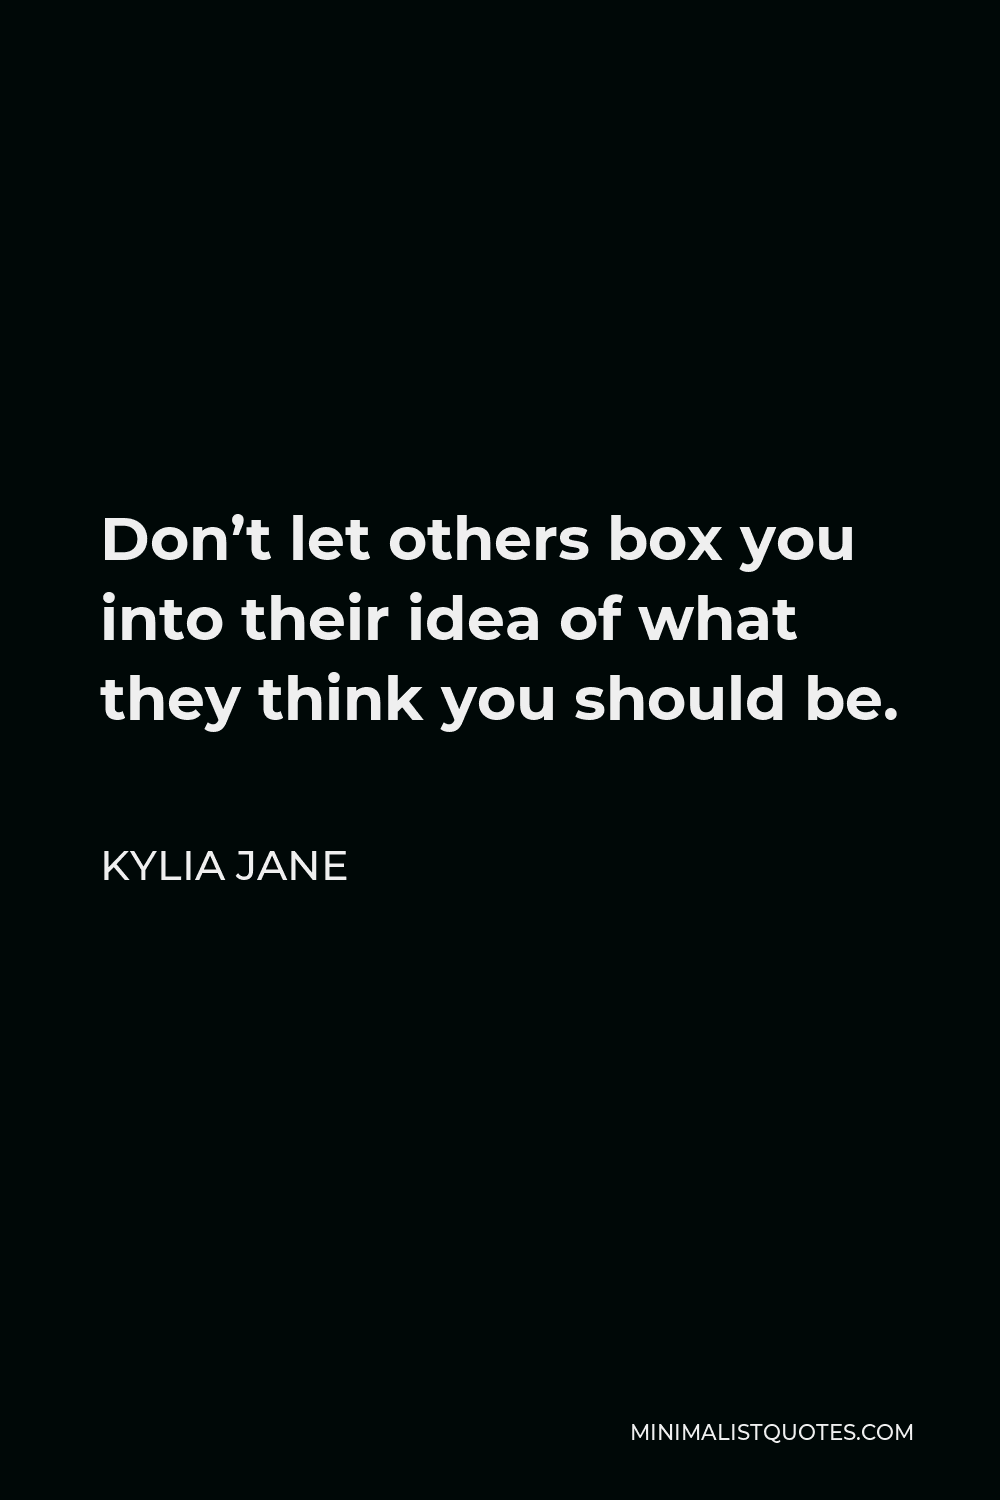 Kylia Jane Quote - Don’t let others box you into their idea of what they think you should be.